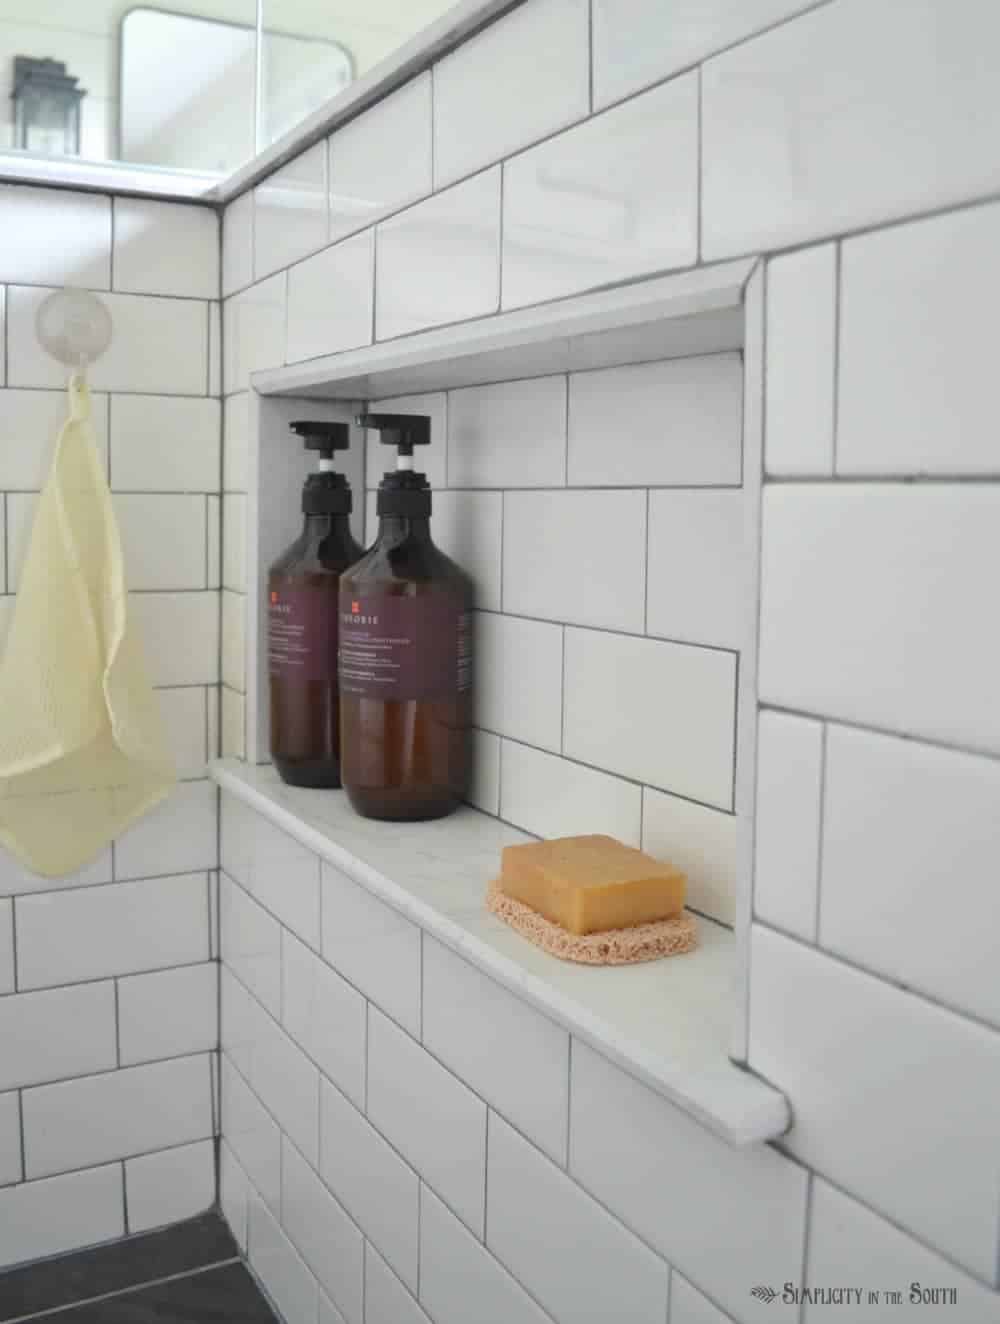 Add a hidden cubby in the shower for soap and shampoo. This is a good way to add storage in a bathroom and make it look neat and organized. 